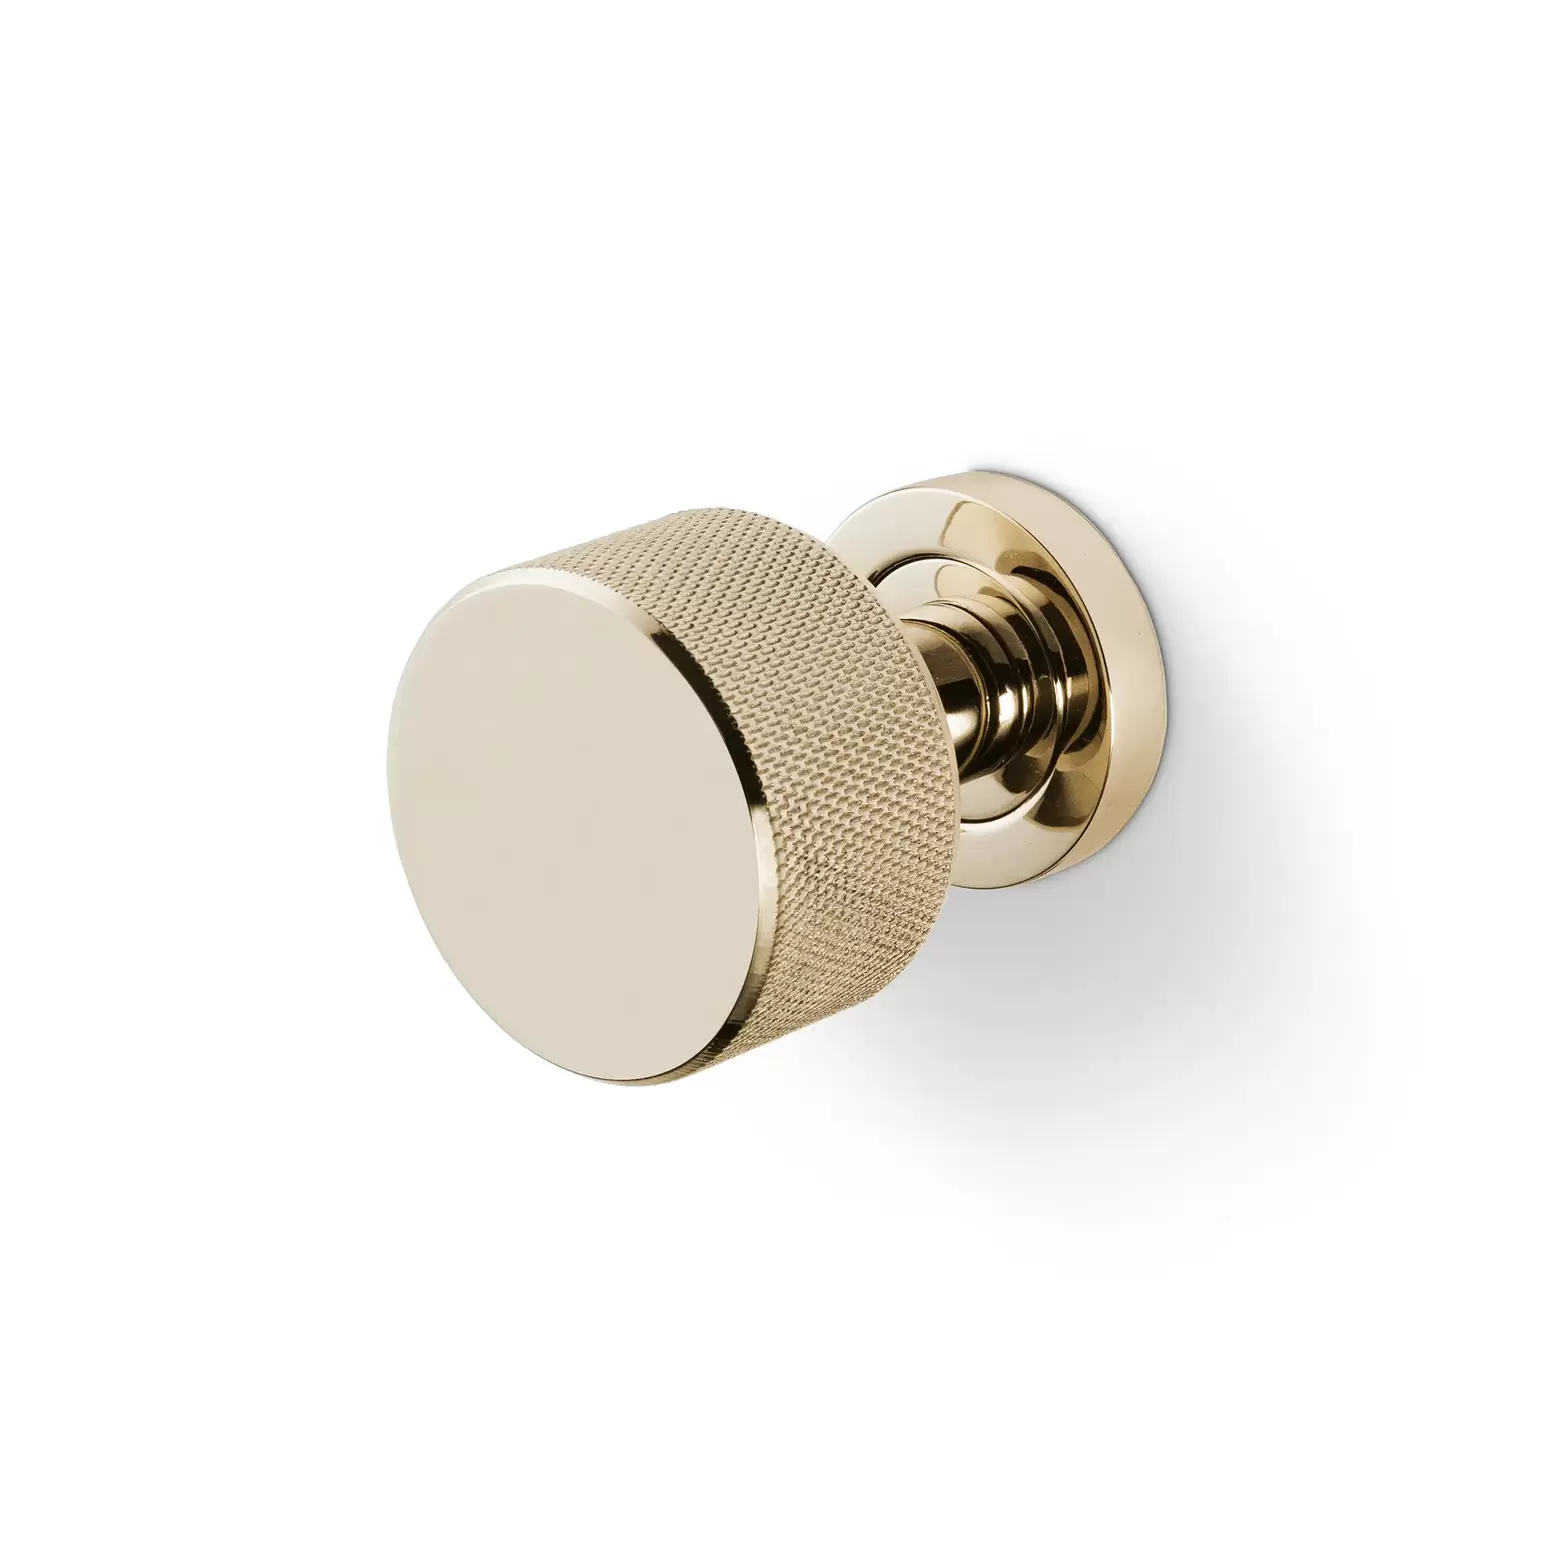 New Products By PullCast:Decorative Hardware To Leave You Dazzled